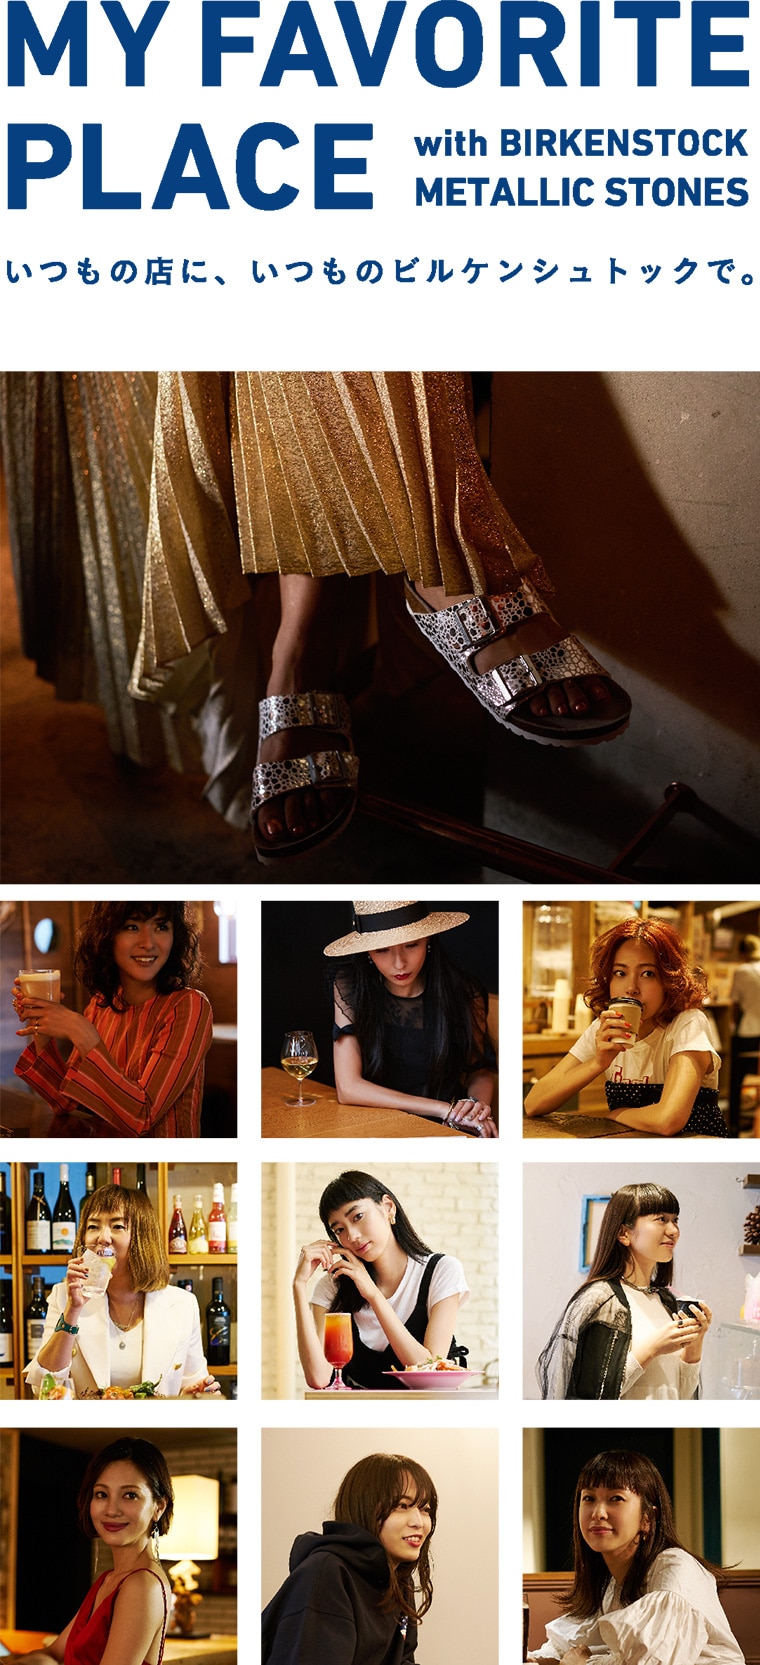 MY FAVORITE PLACE with BIRKENSTOCK METALLIC STONES  #01 クリス-ウェブ 佳子